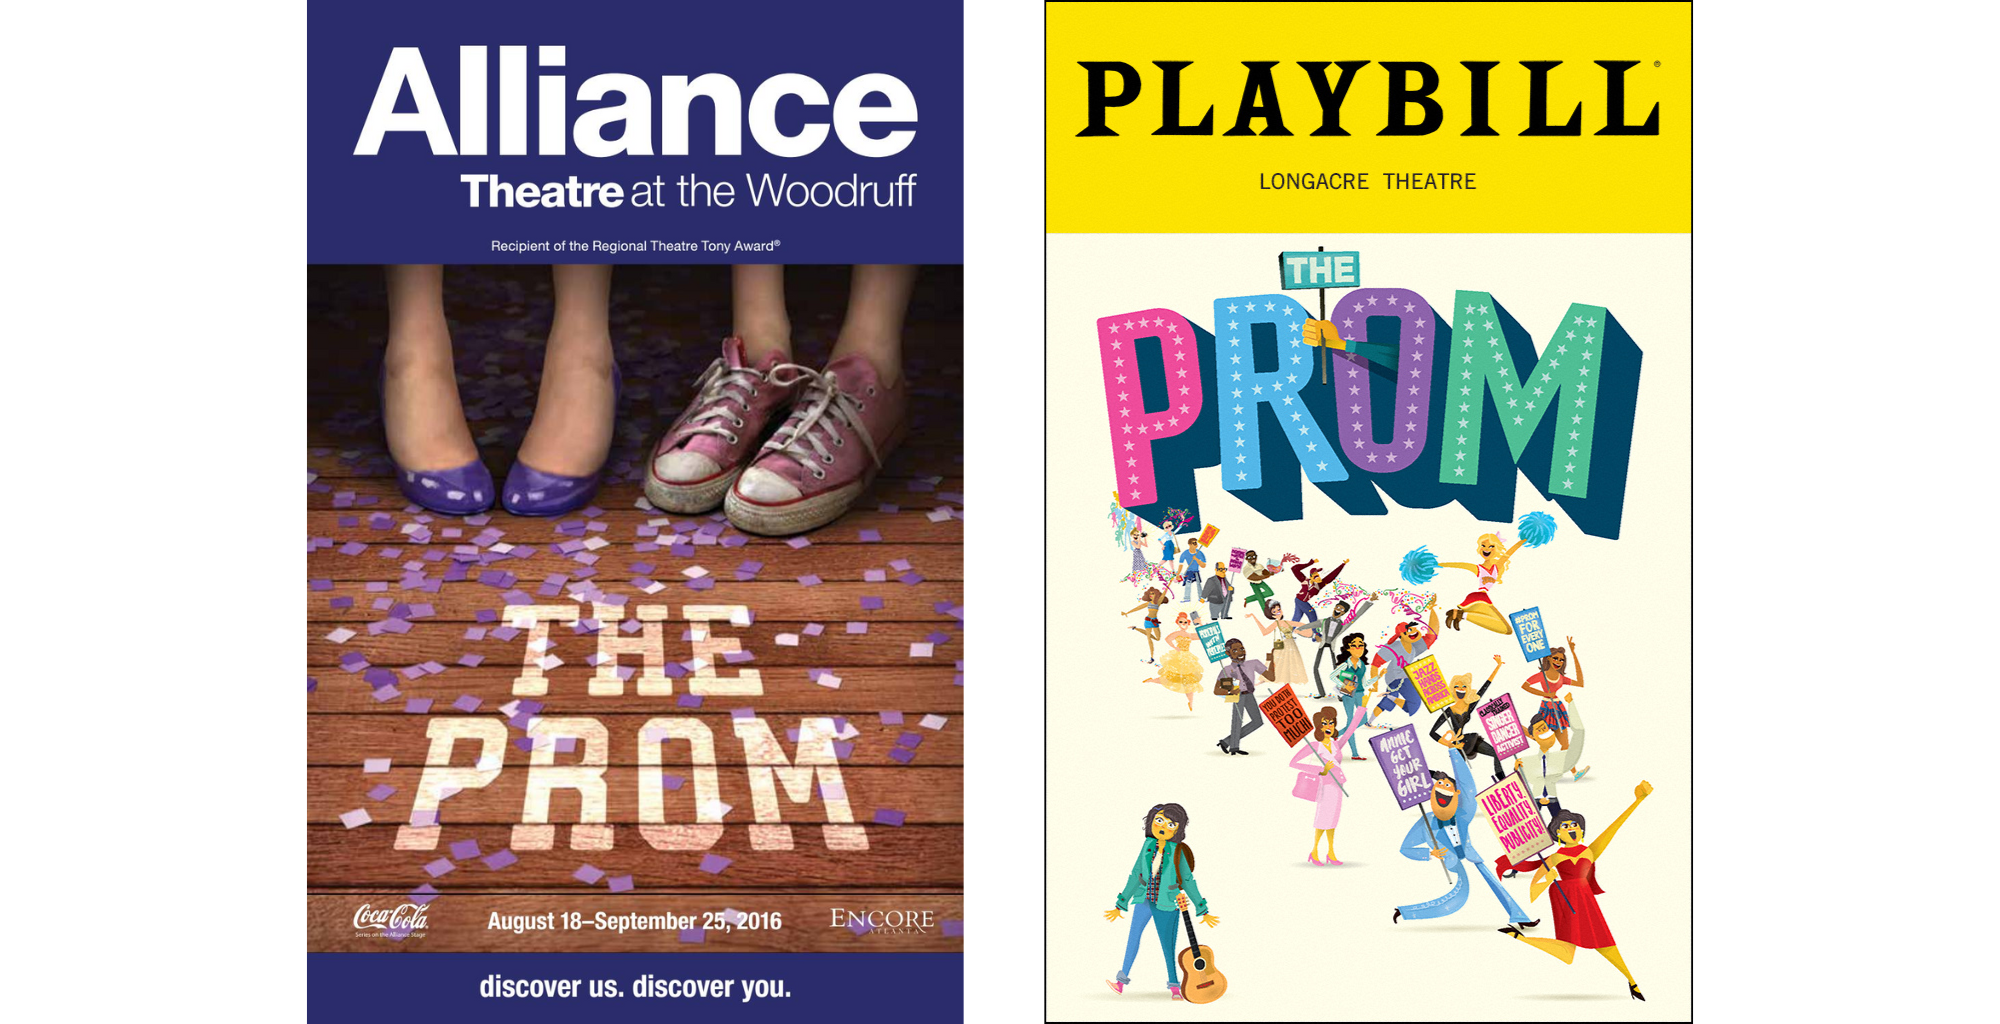 Program covers for The Prom at the Alliance Theater and on Broadway